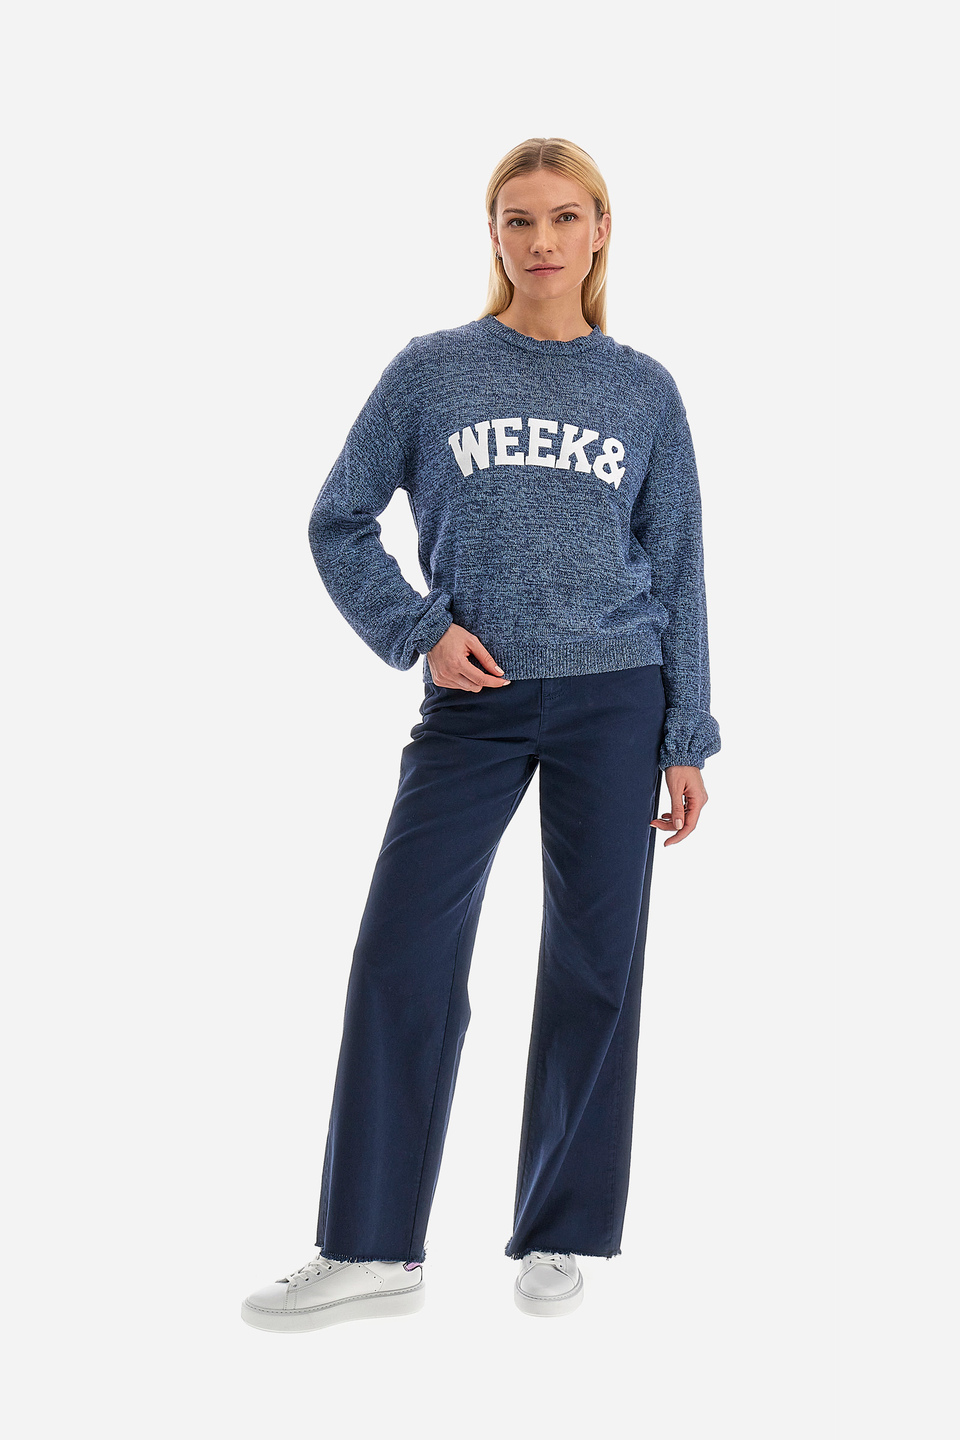 Women's round-neck long-sleeved sweater with Spring Weekend logo - Videl | La Martina - Official Online Shop